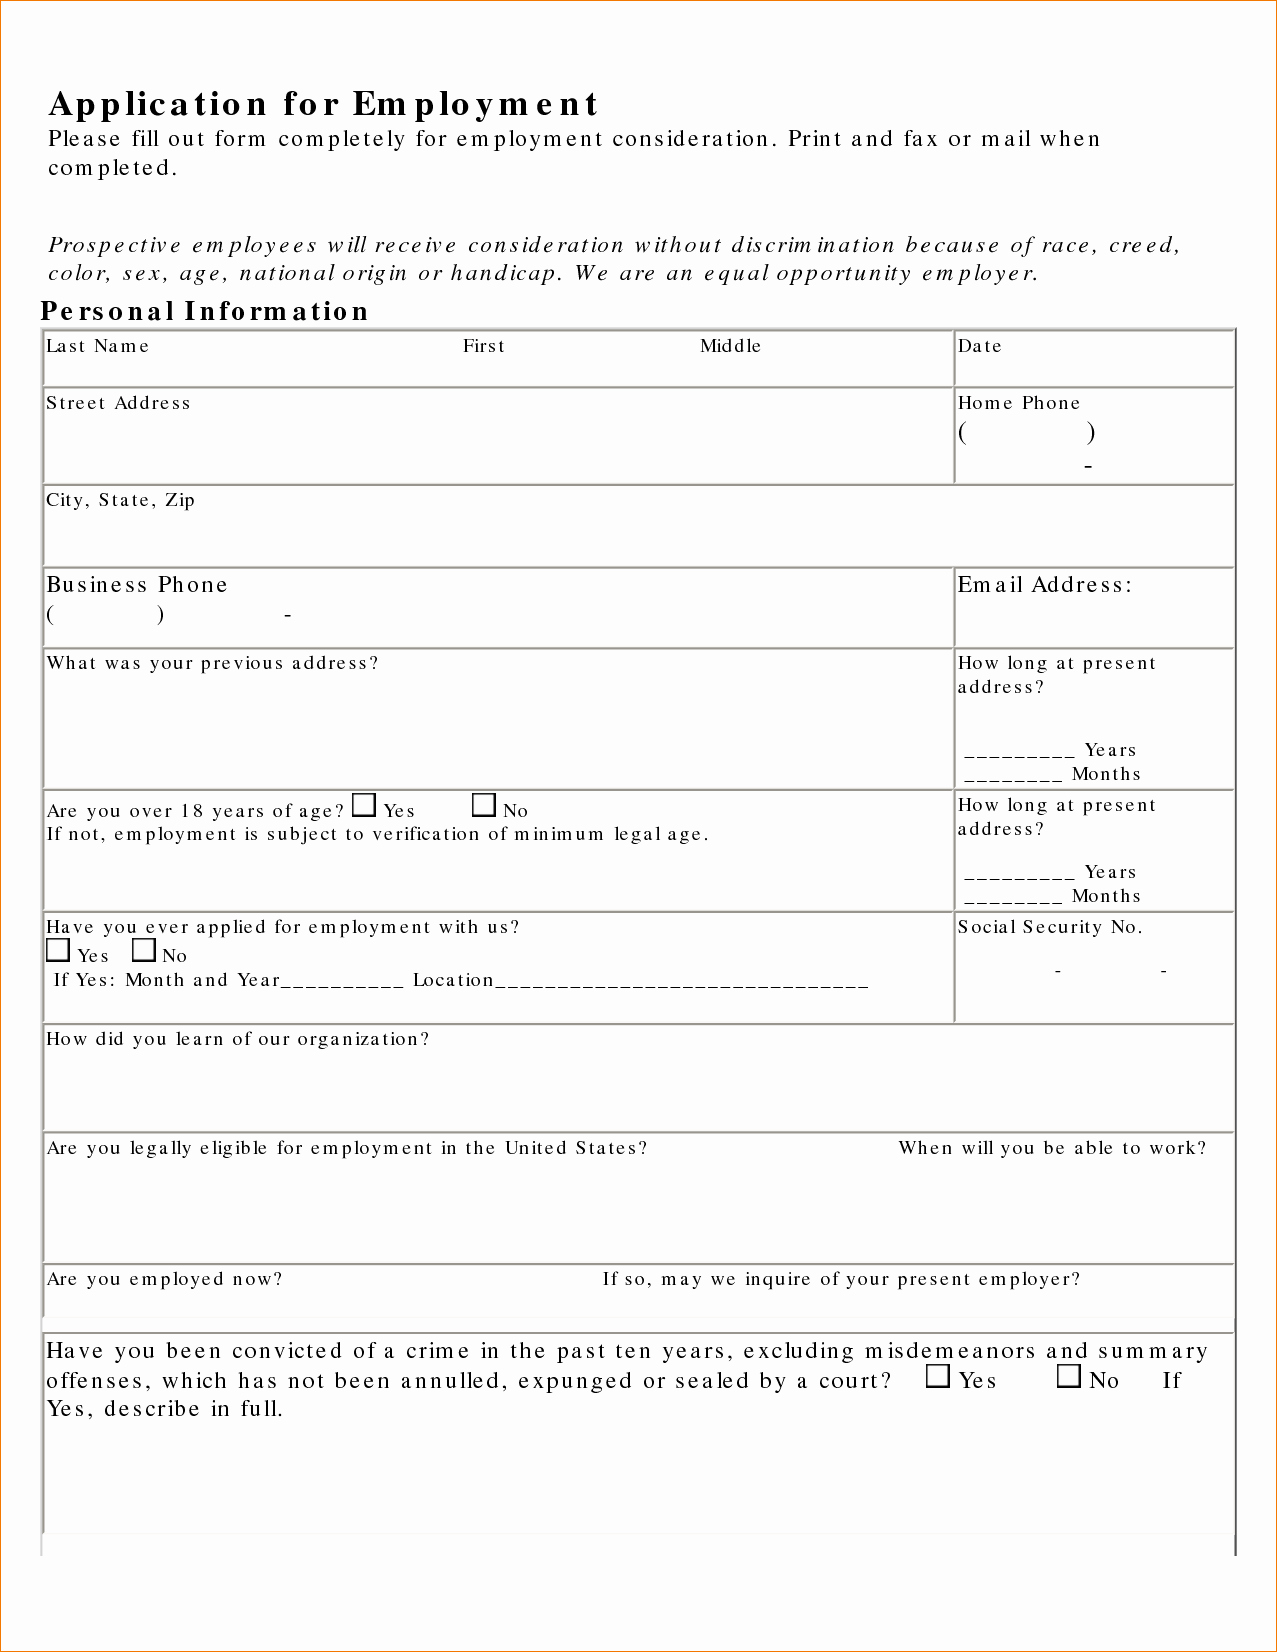 Resume forms to Fill Out New 13 How to Fill Out Job Applicationagenda Template Sample